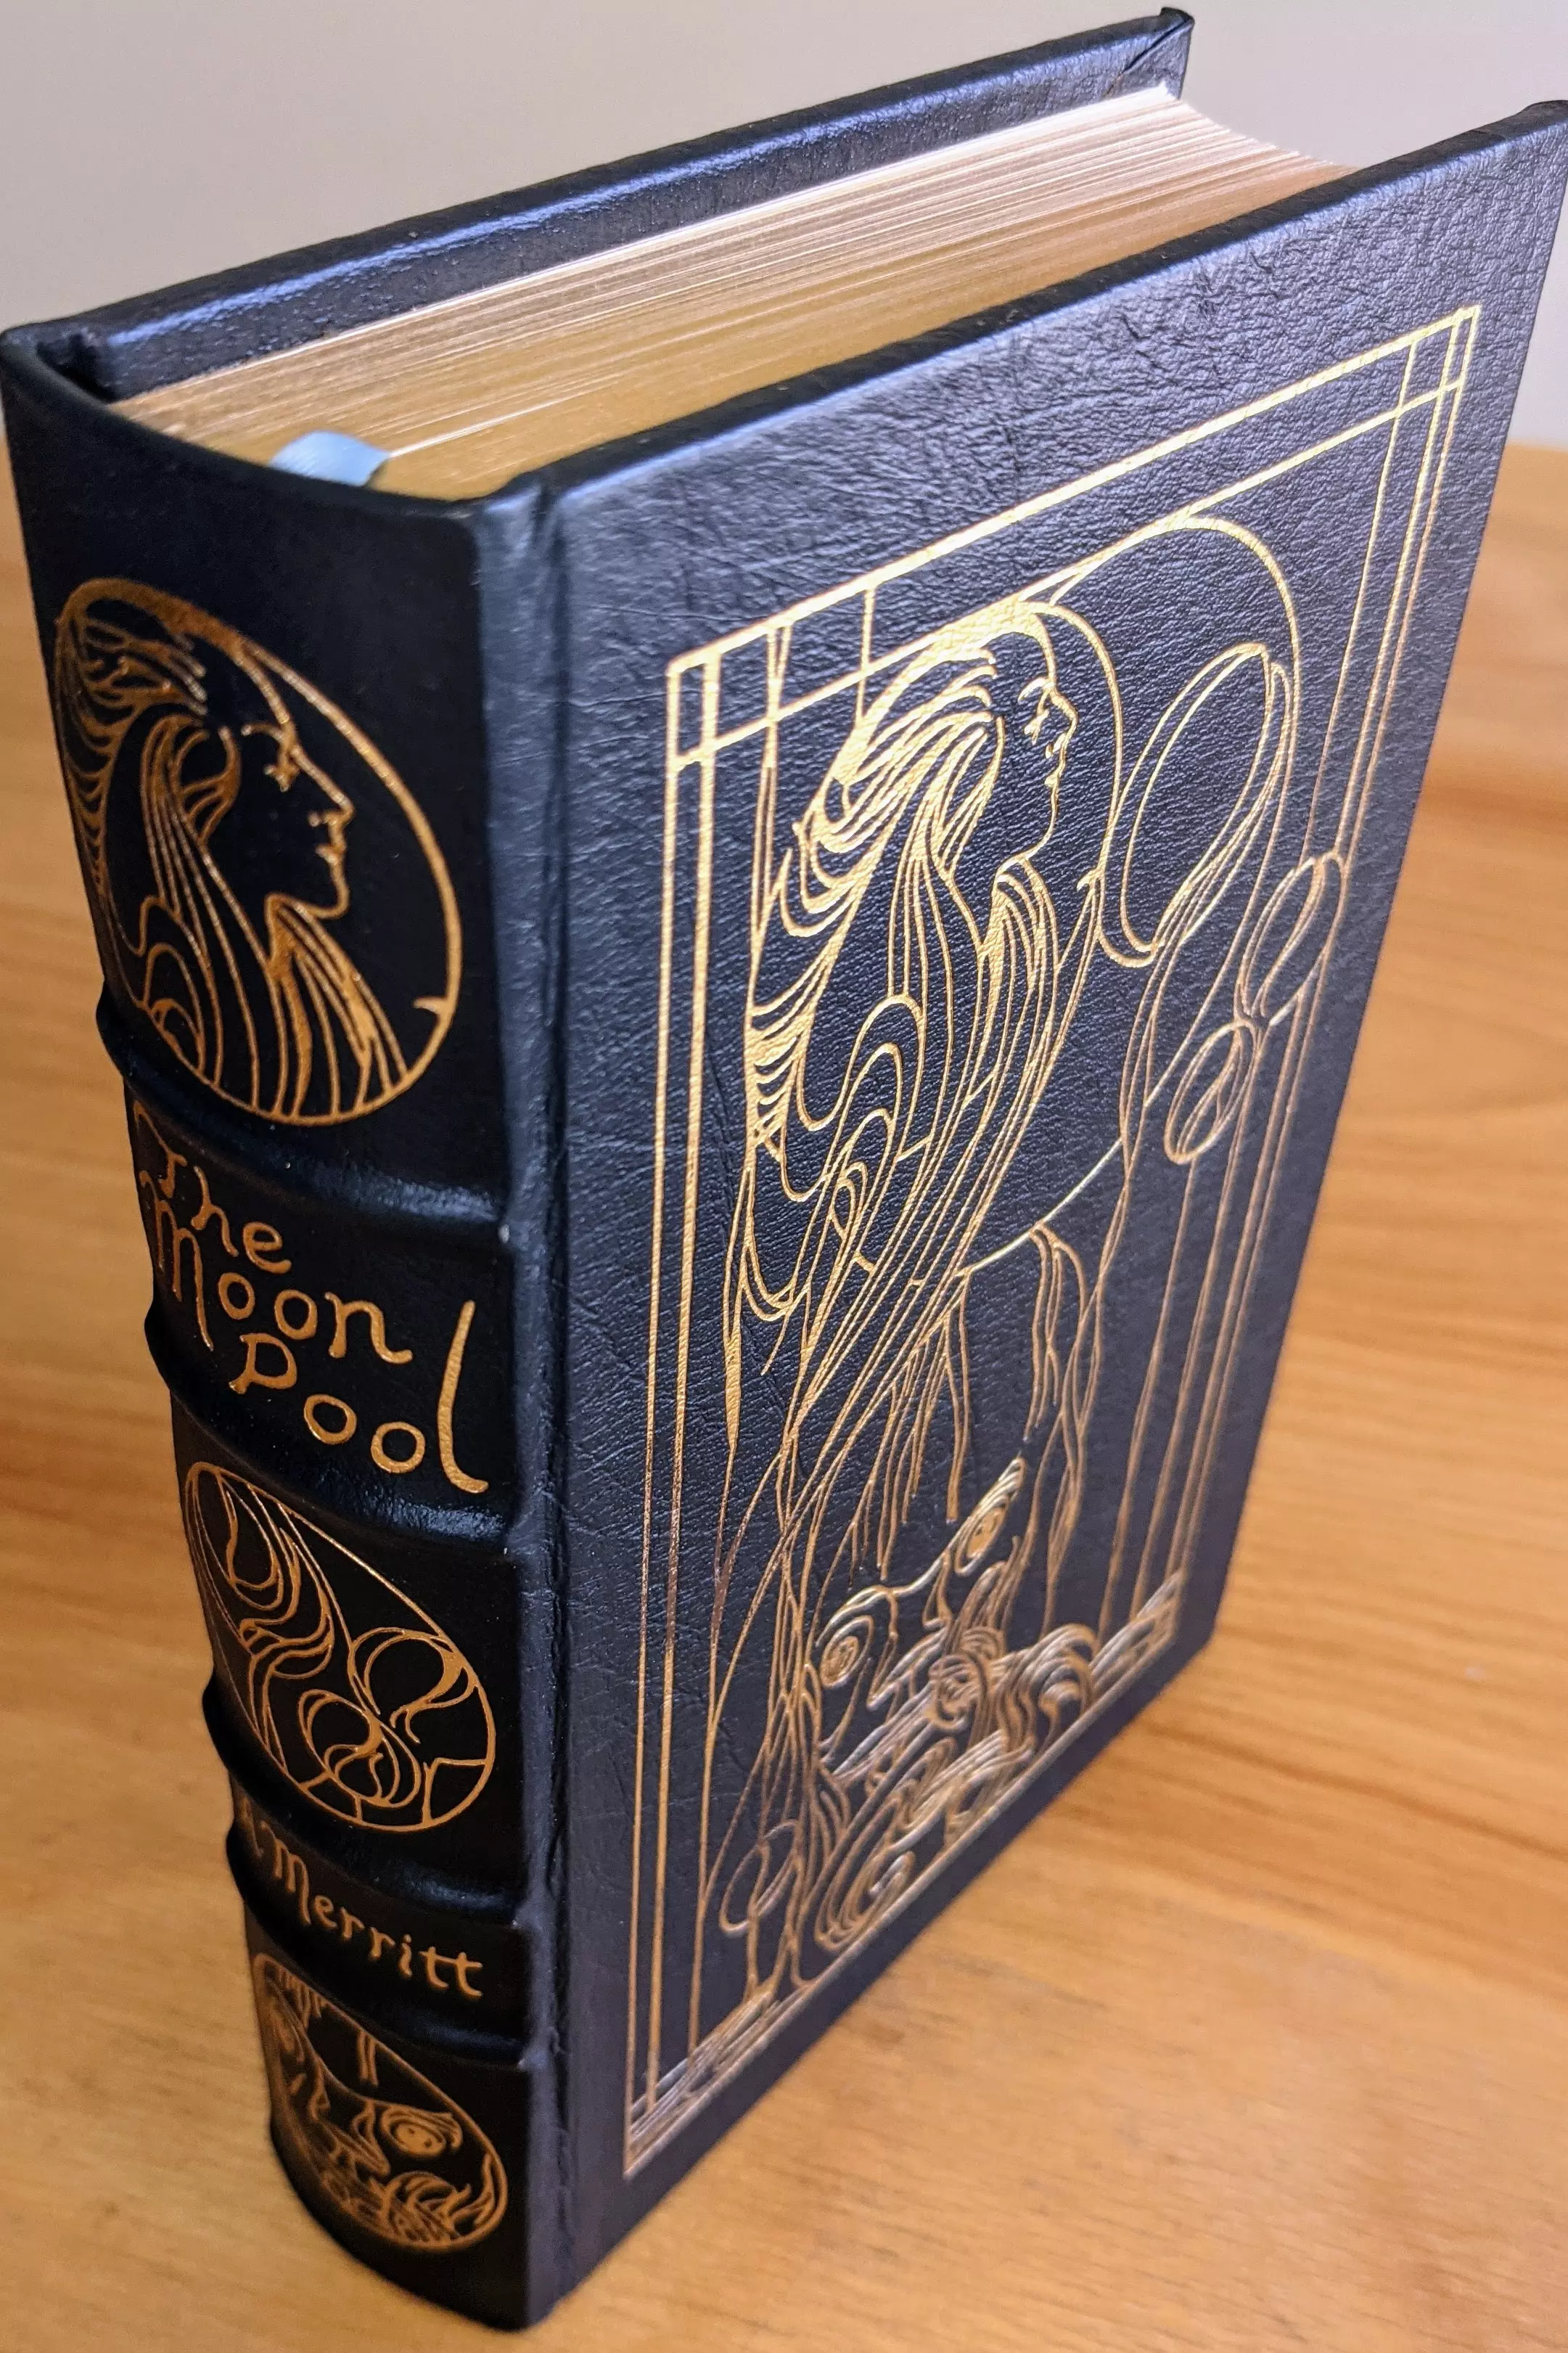 Stunning Bue Leather Bound hardback book with hubbed spine, cover artwork in 22kt gold, printed on archival paper with gold gilded edges, smyth sewing & concealed muslin joints
	  - original artwork by Todd Cameron Hamilton